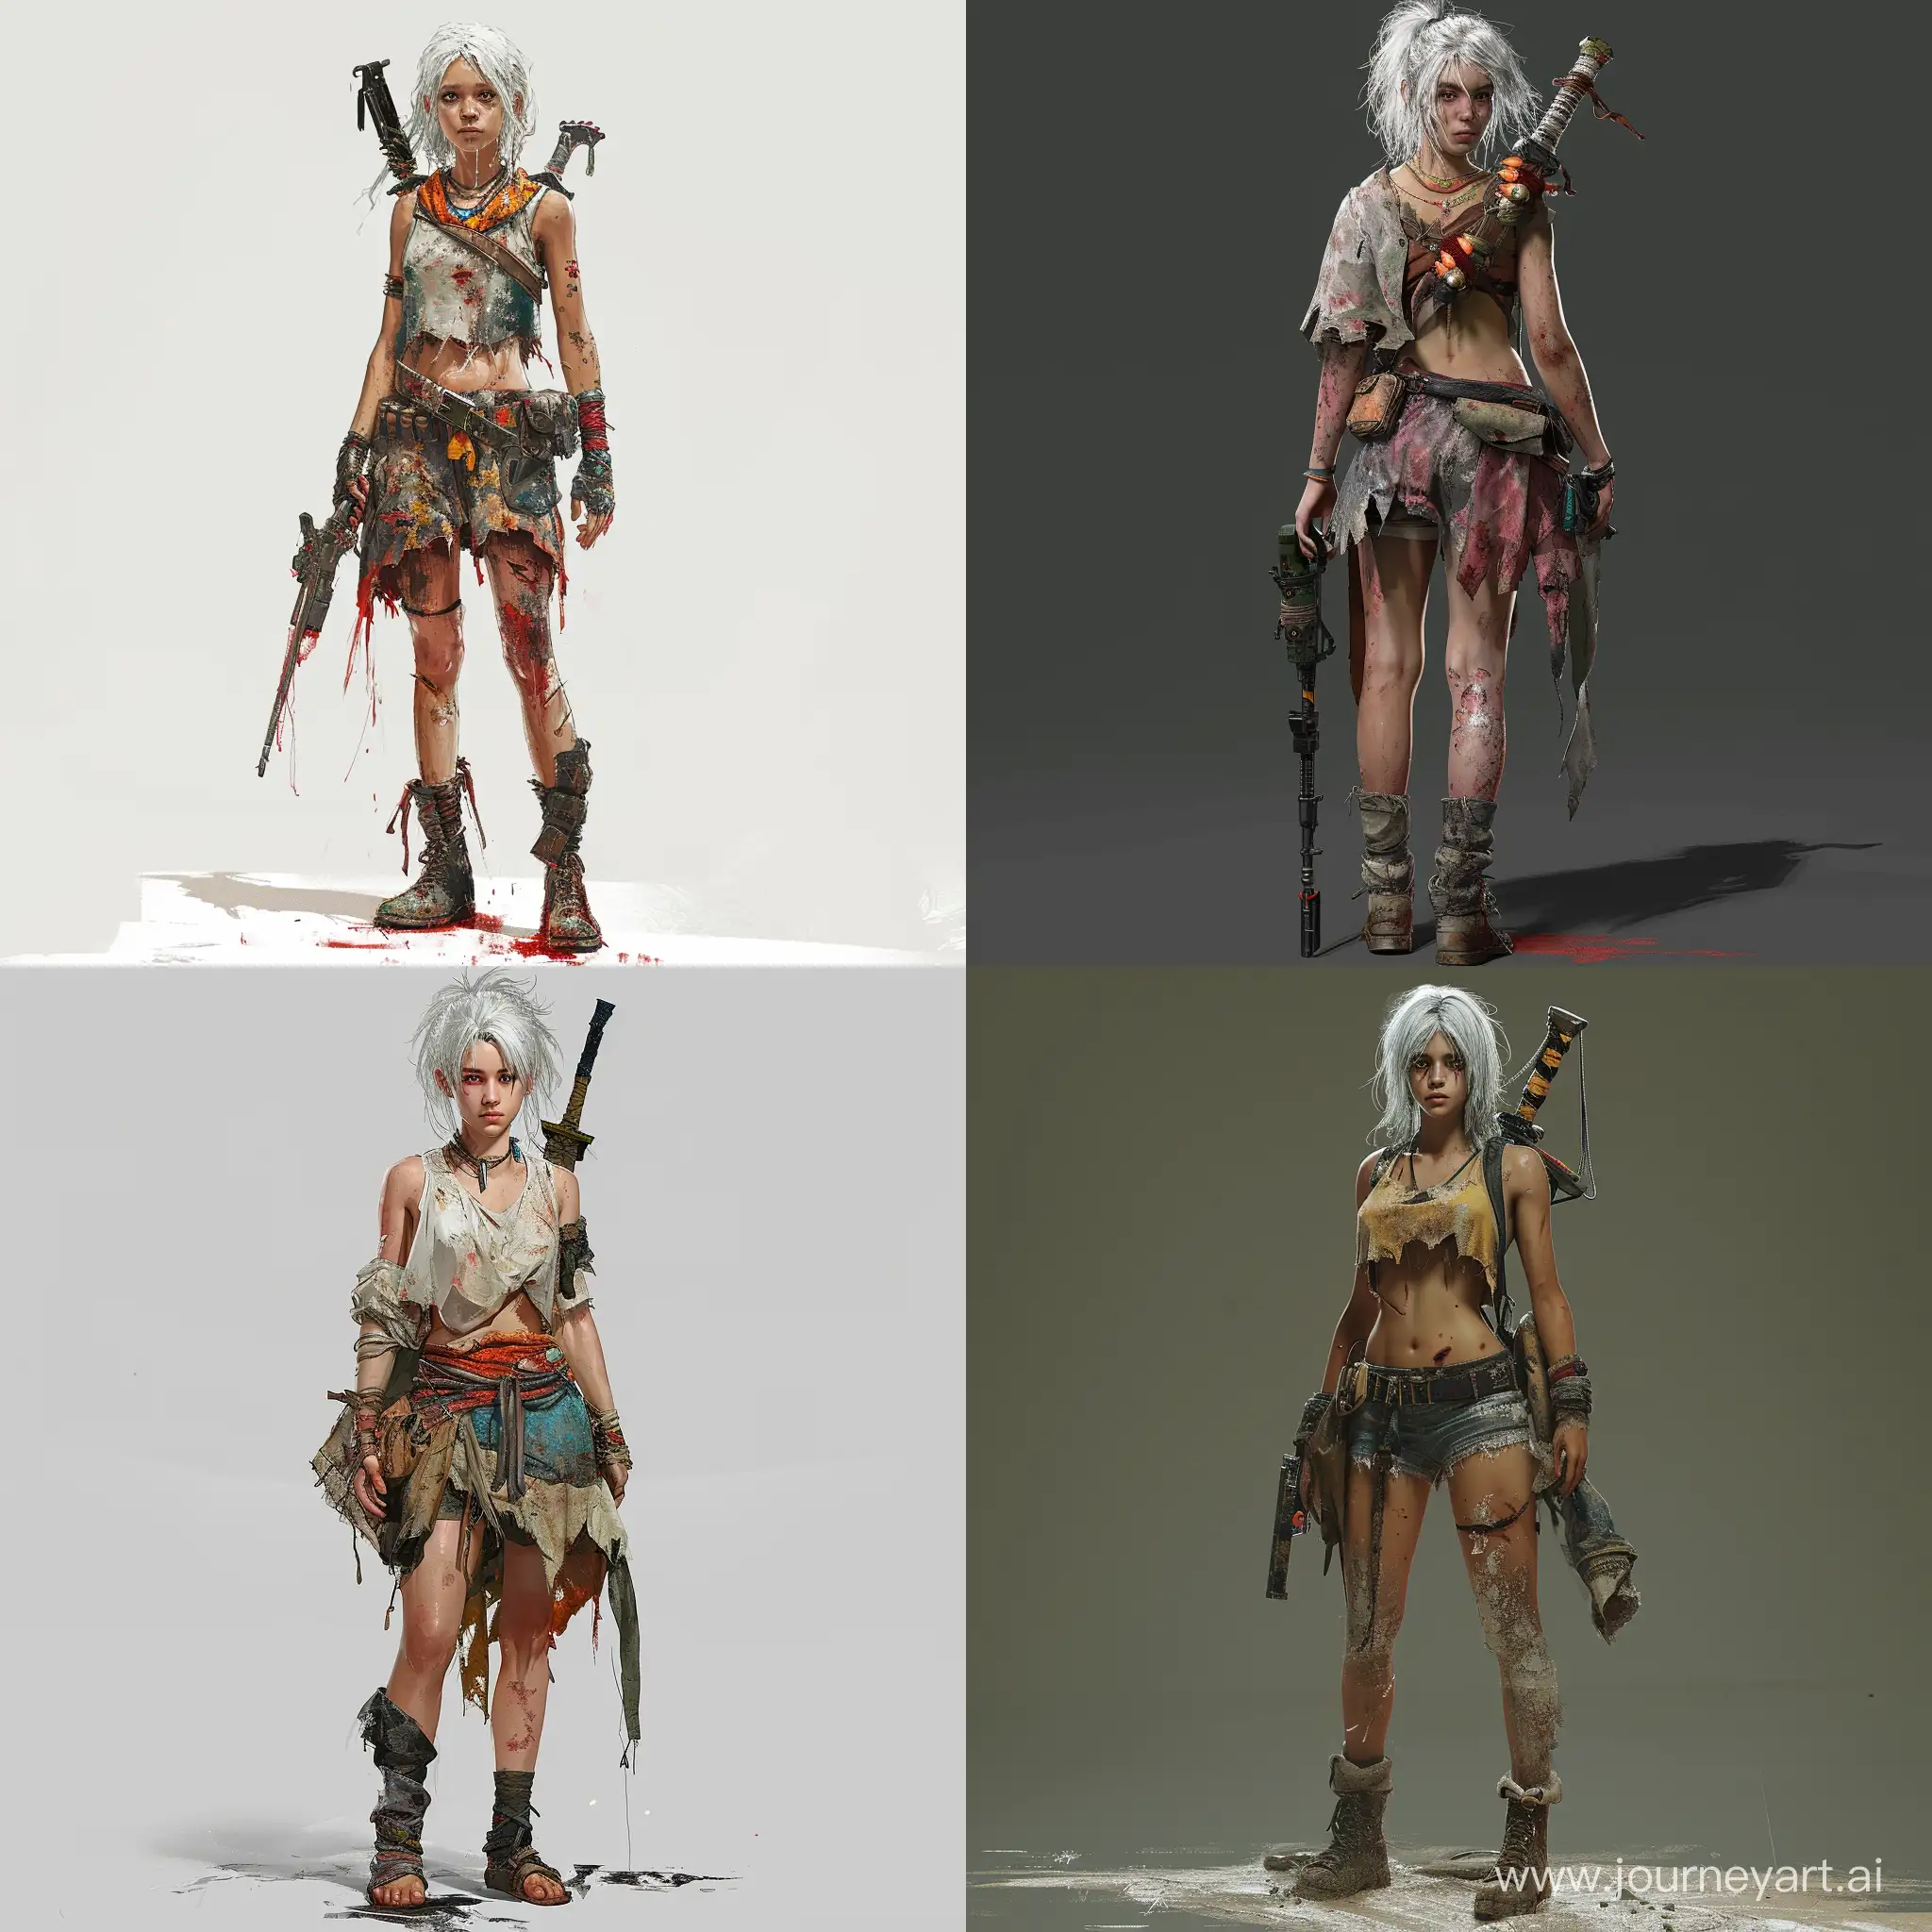 The character is a woman, with white hair, about 16 years old, with shabby clothes and a weapon on her back